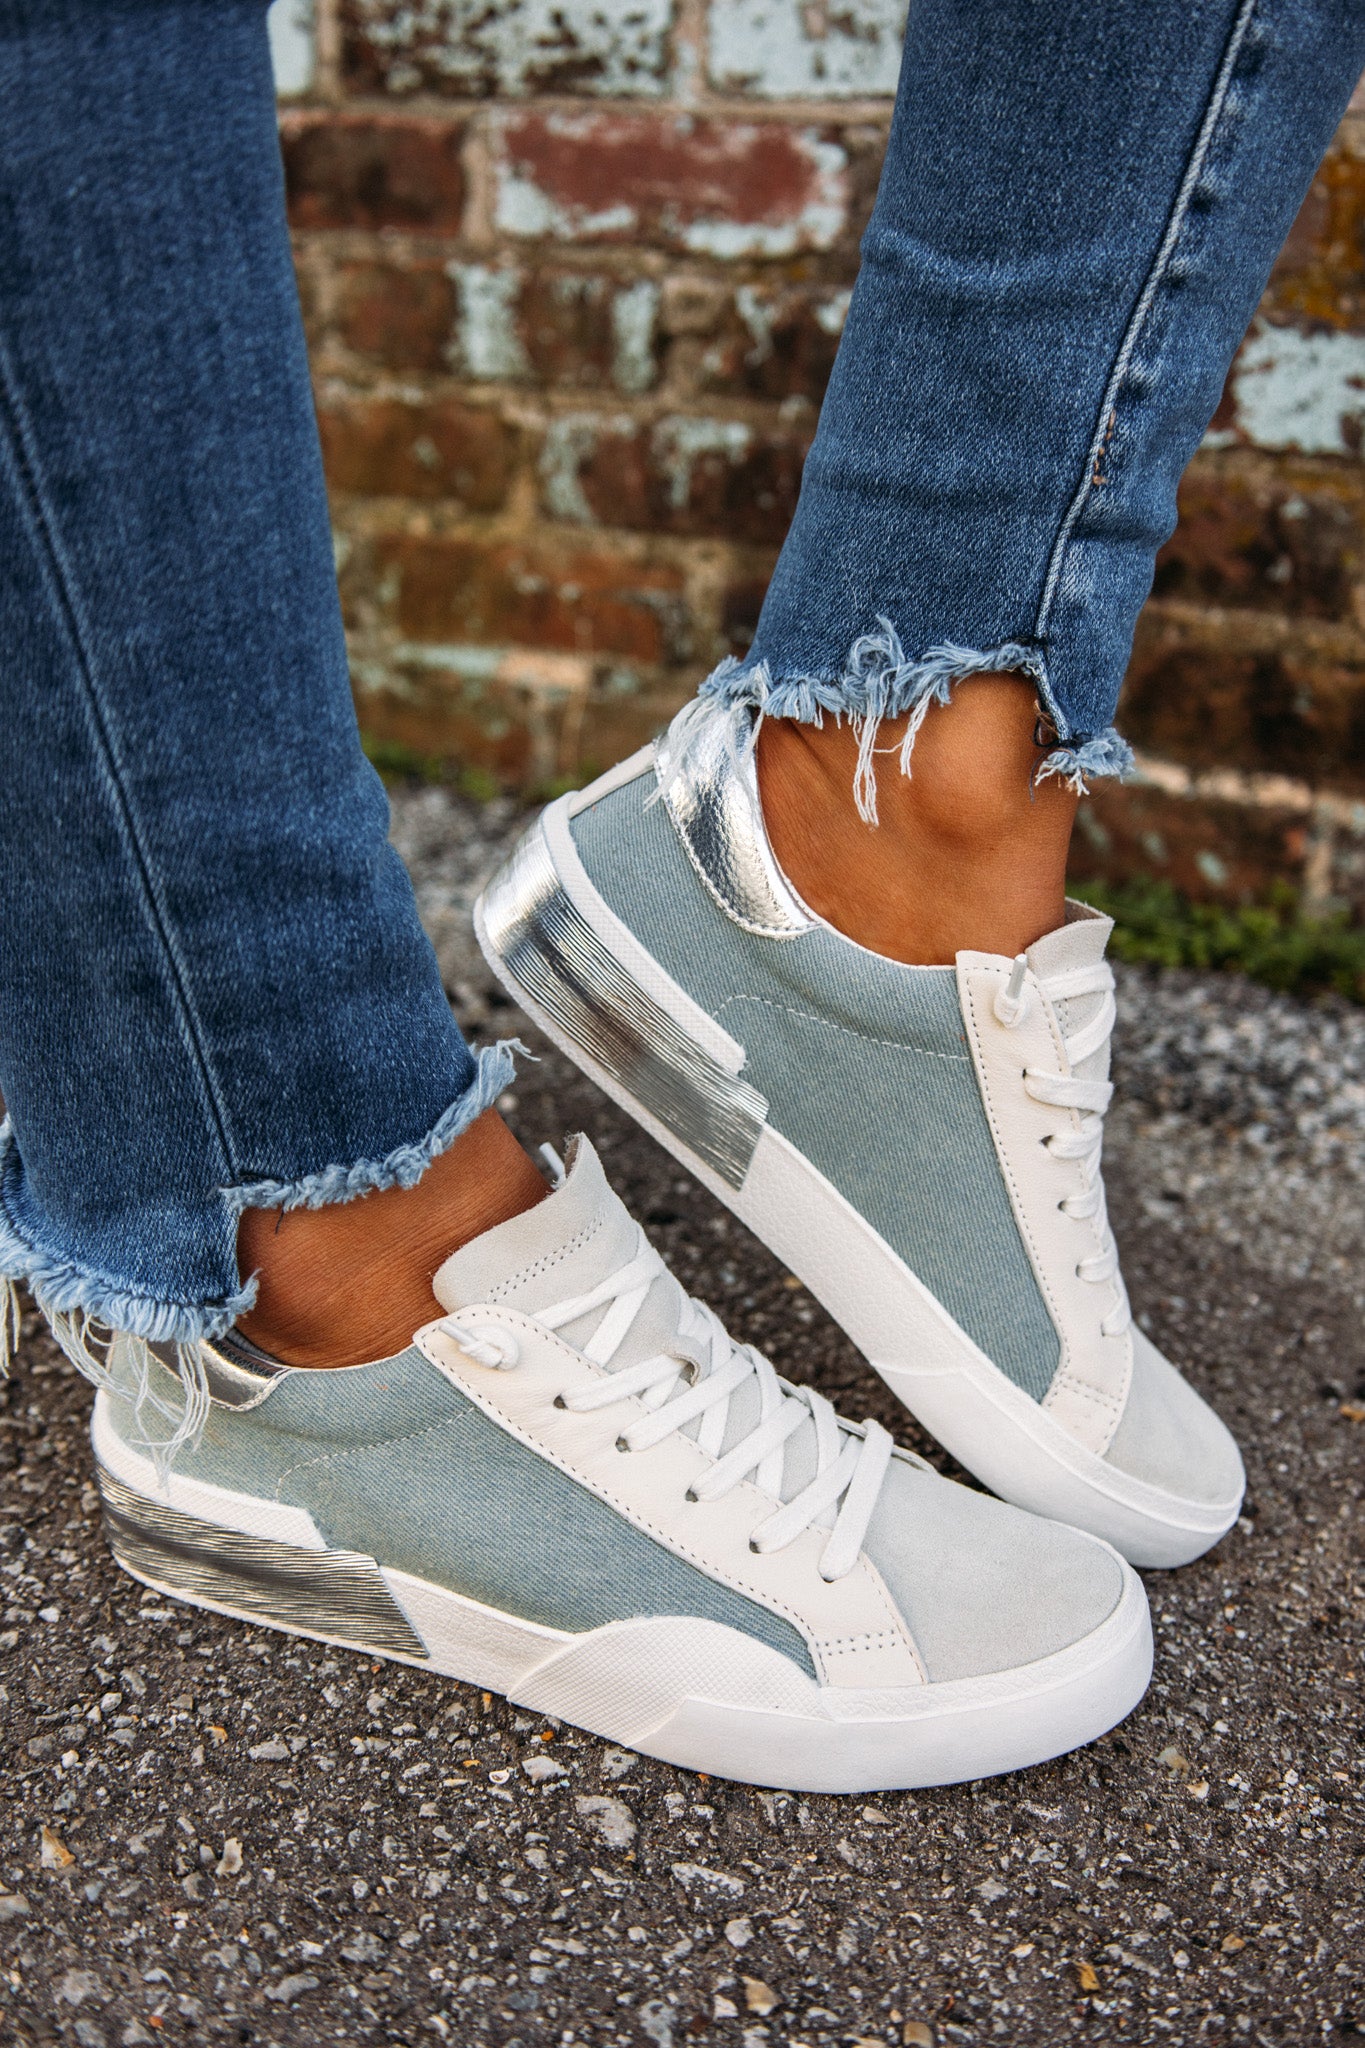 Dolce Vita: Zina Sneakers - Light Blue Denim – Sincerely Yours